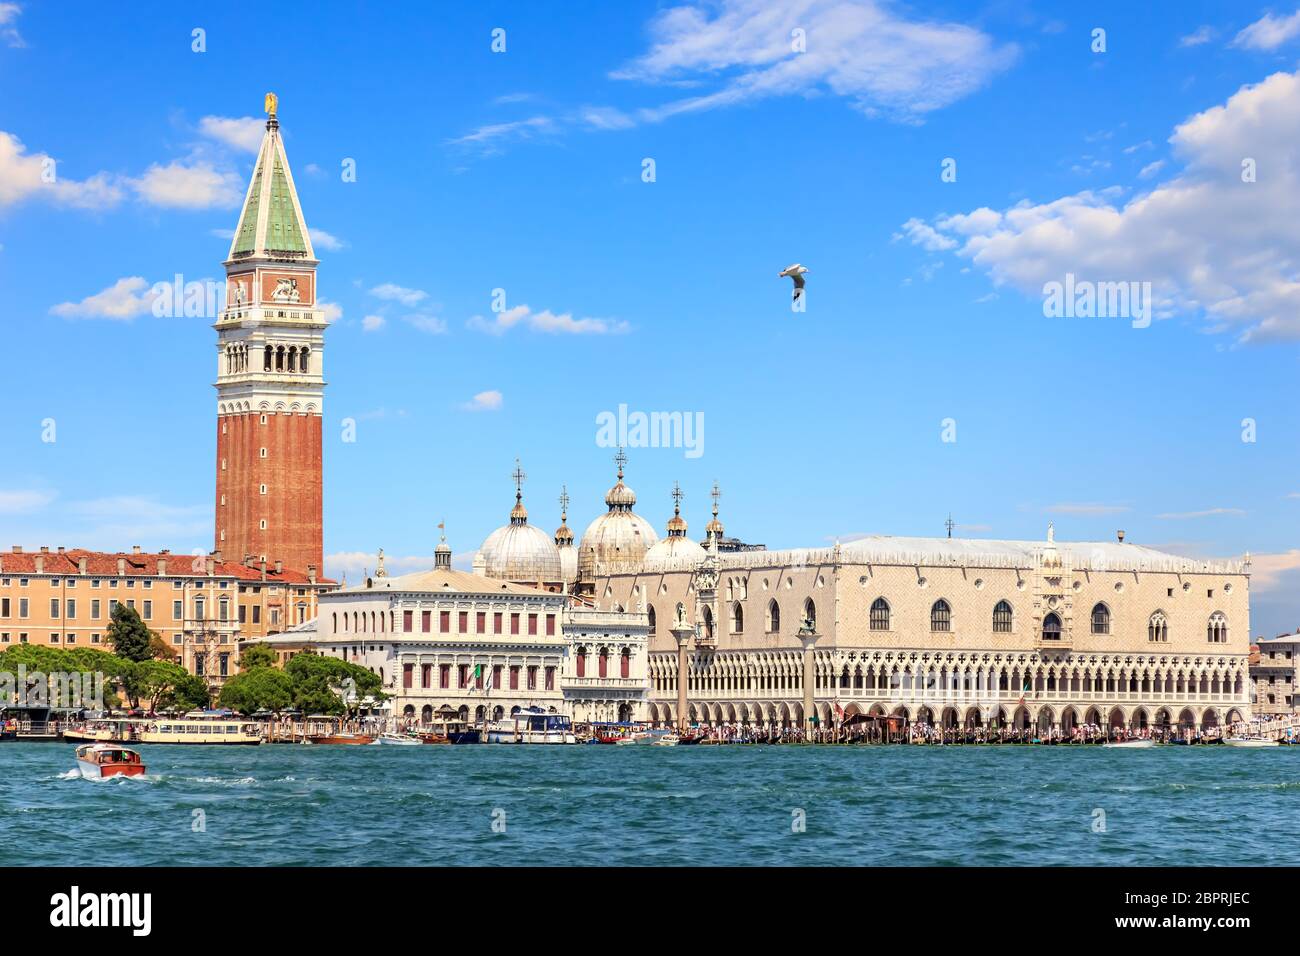 Doge's Palace and St Mark's Square, view from the sea, Venice, Italy. Stock Photo